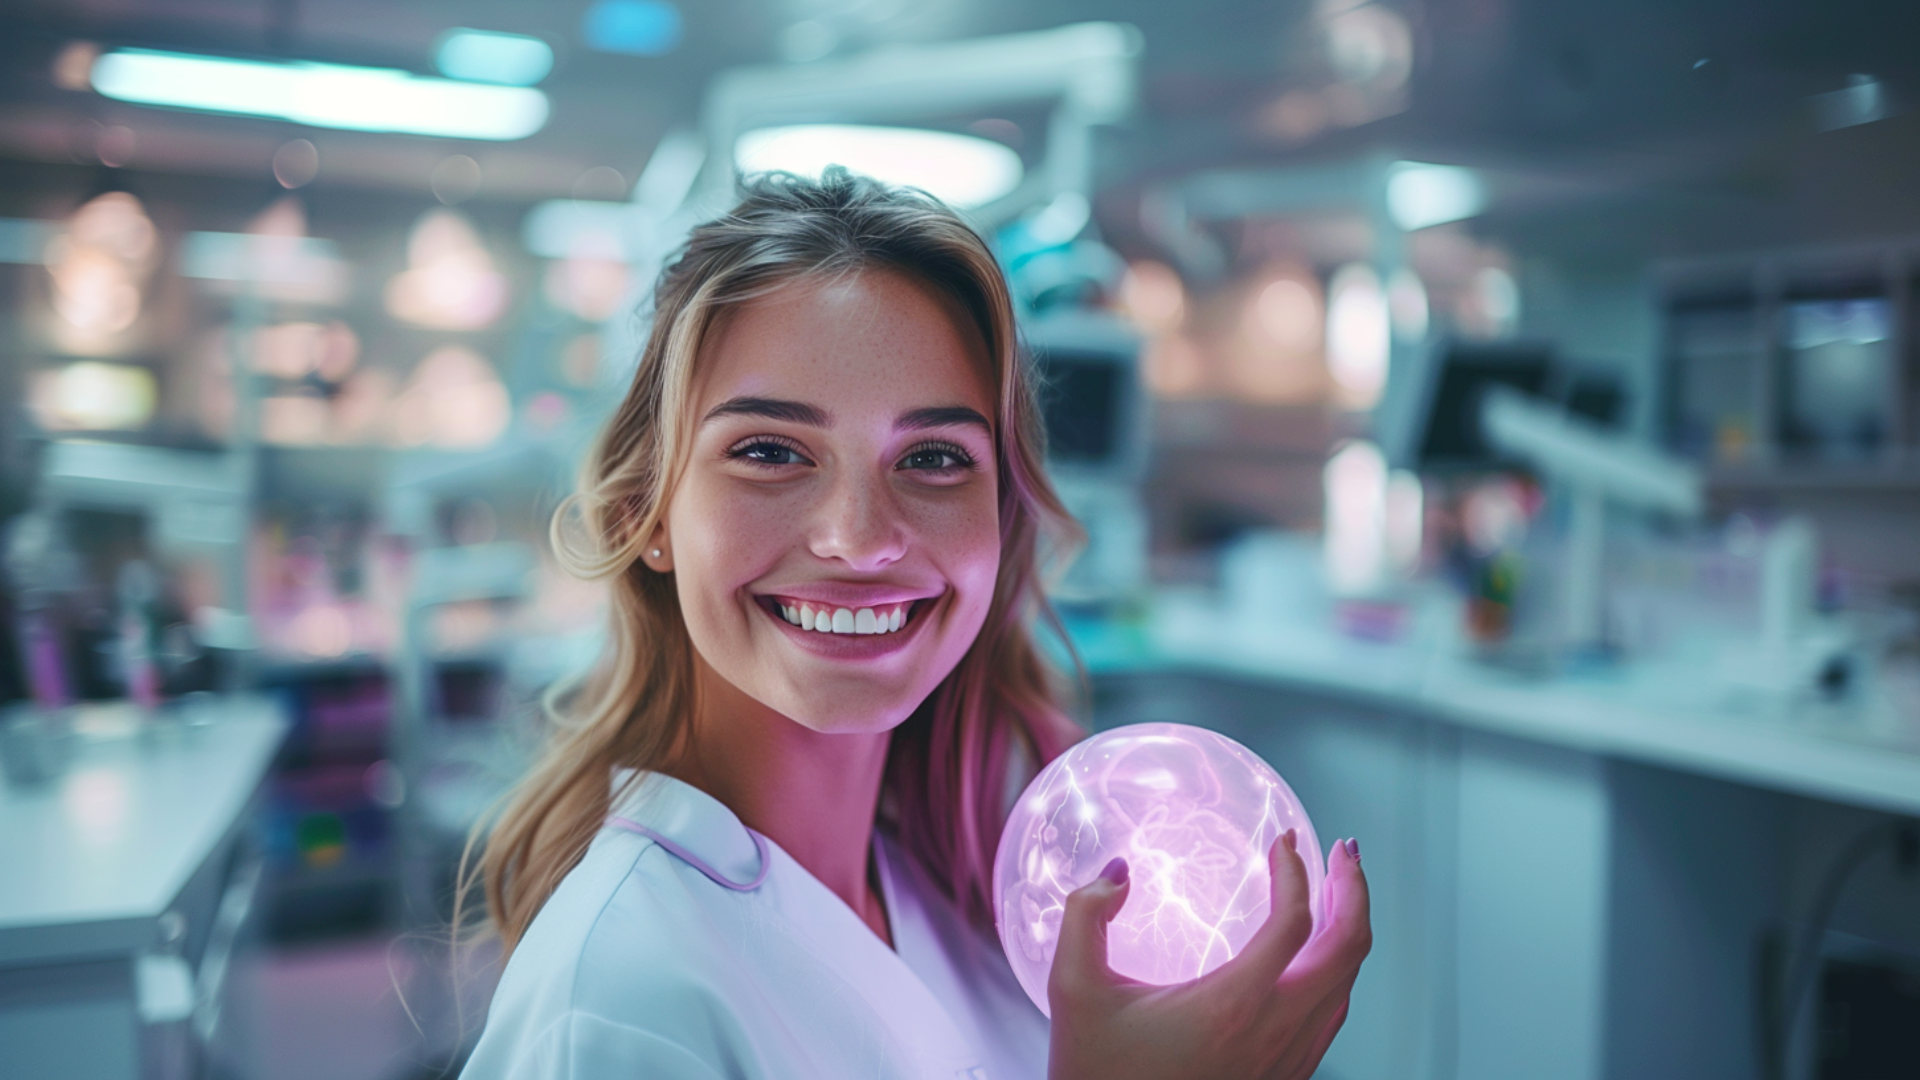 How to Become a Dental Hygienist Leader with AI